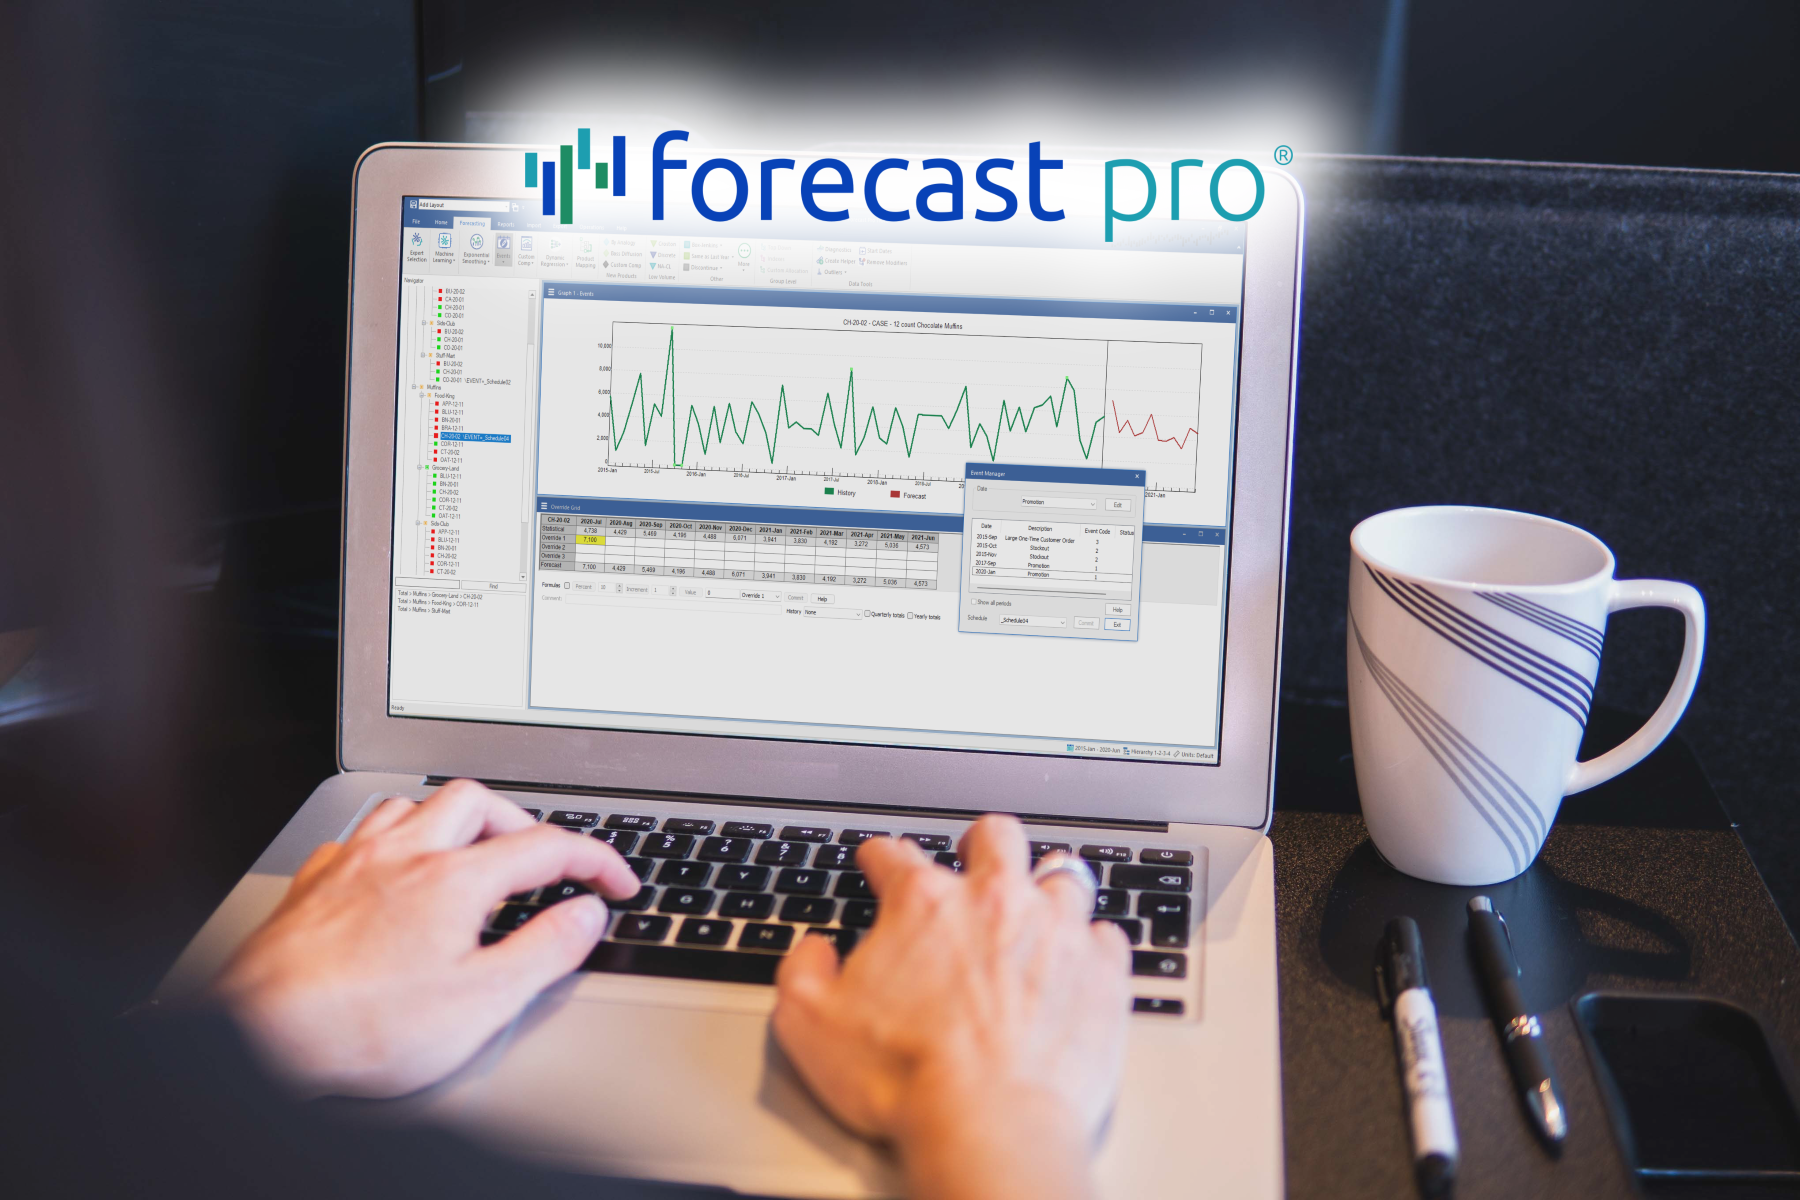 Laptop Screen With Forecast Pro Software